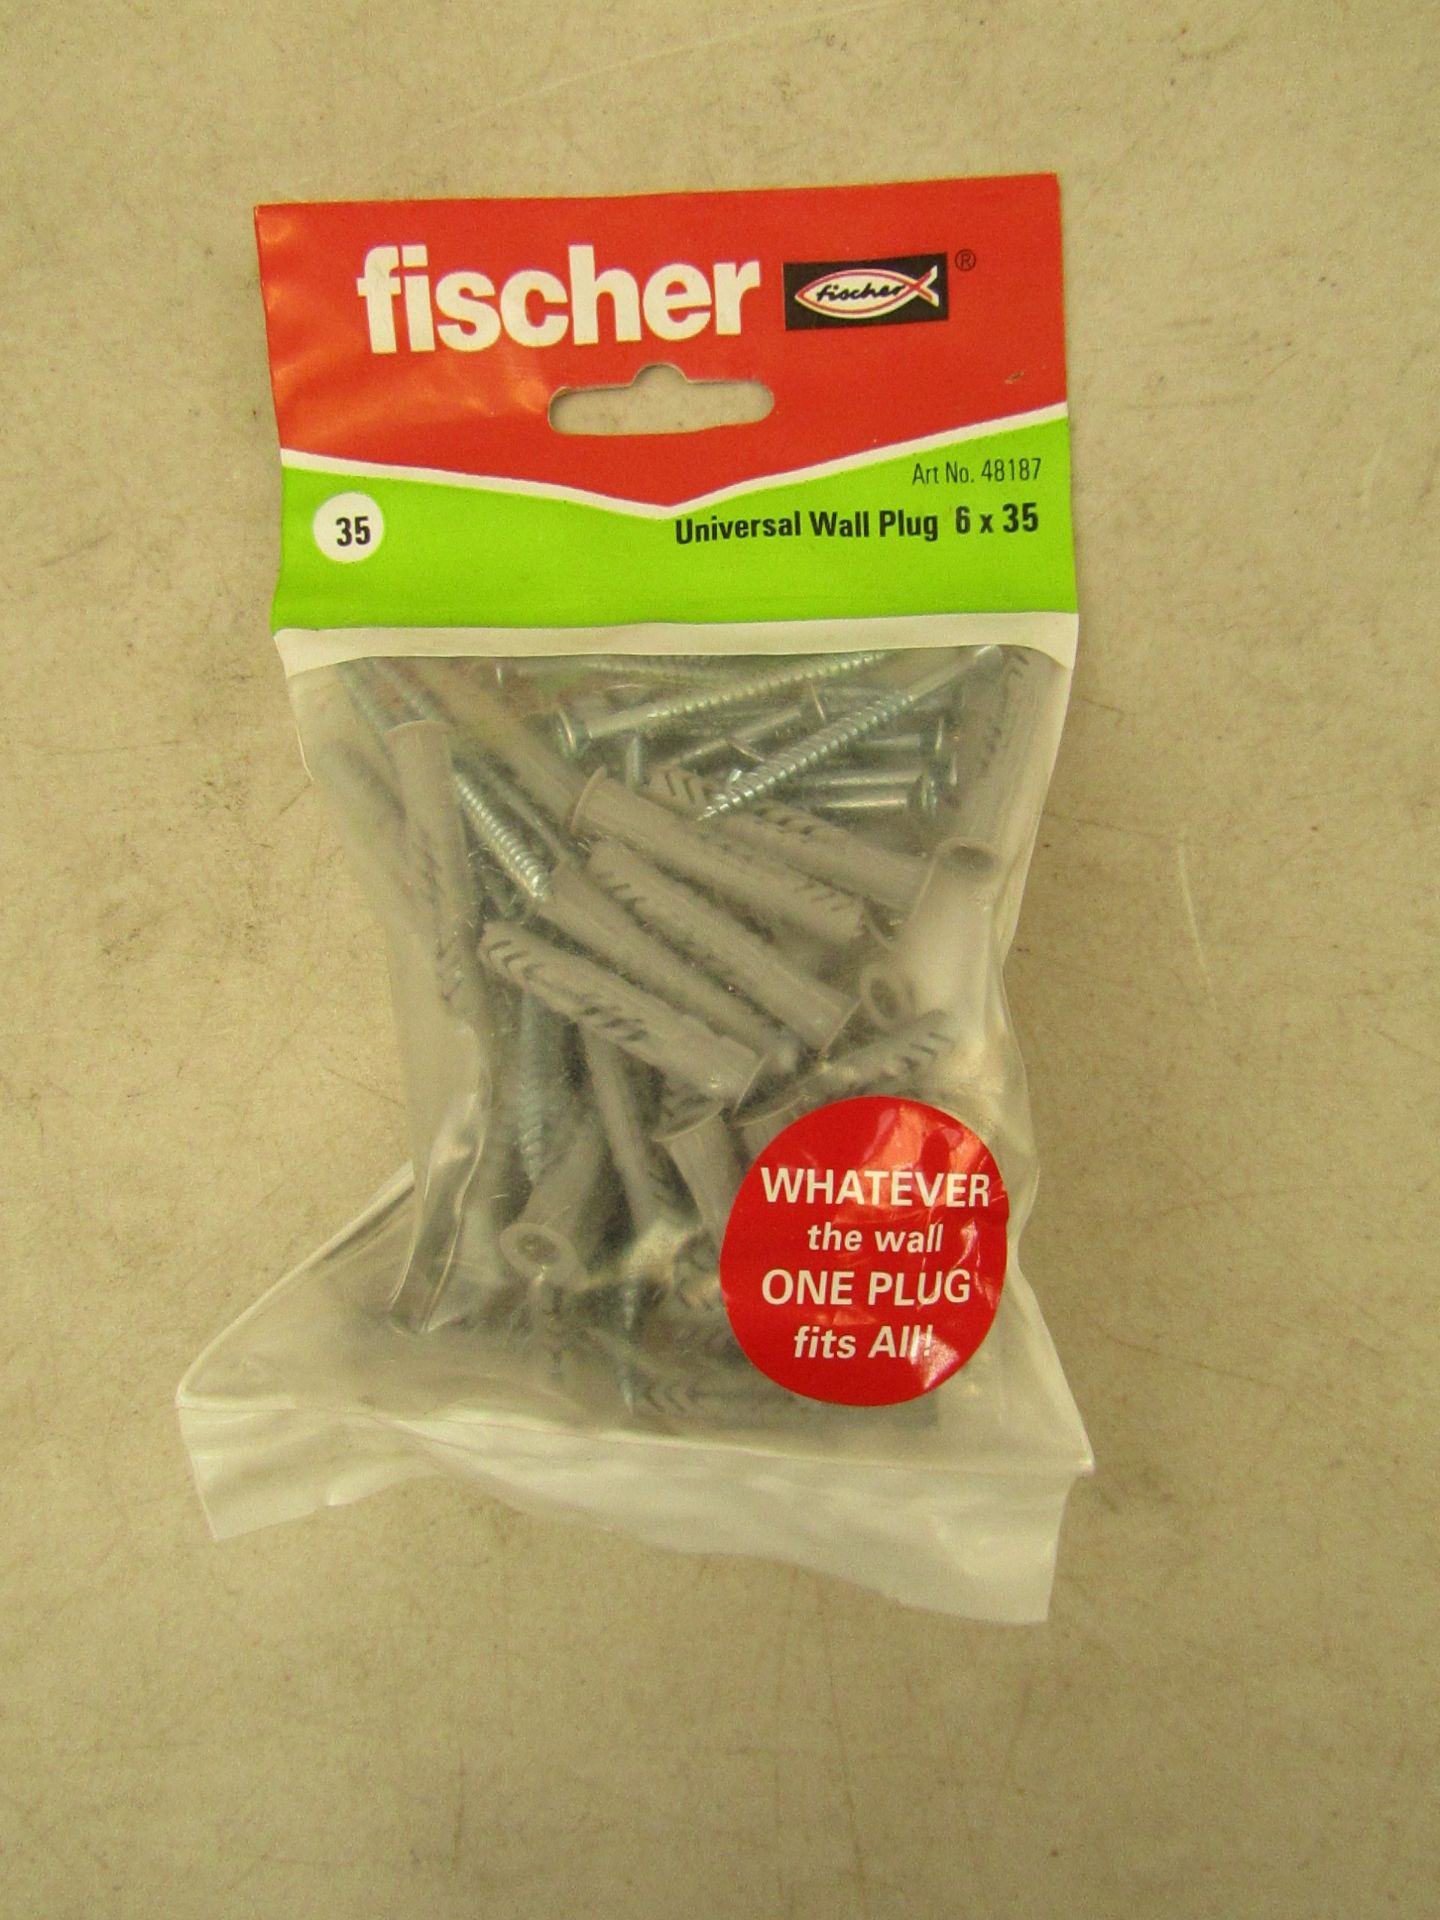 10x Fischer universal wall plug, all new and packaged.